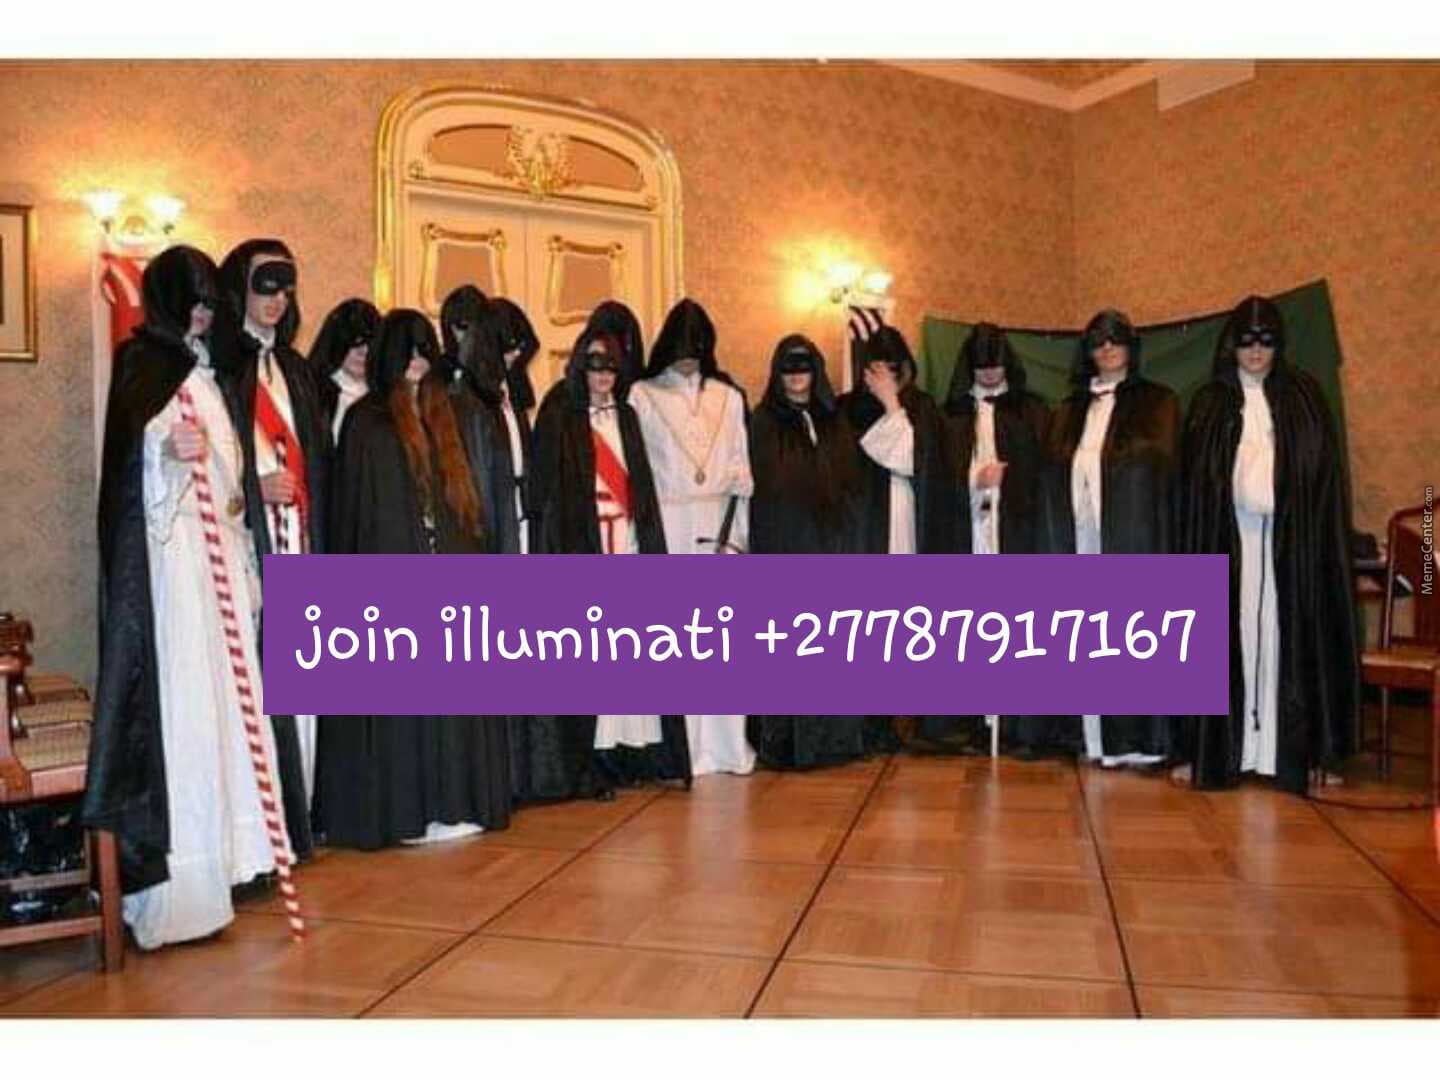 How To Join The Illuminati **666*** Occult Today +27787917167 In Limpopo, Burgersfort,